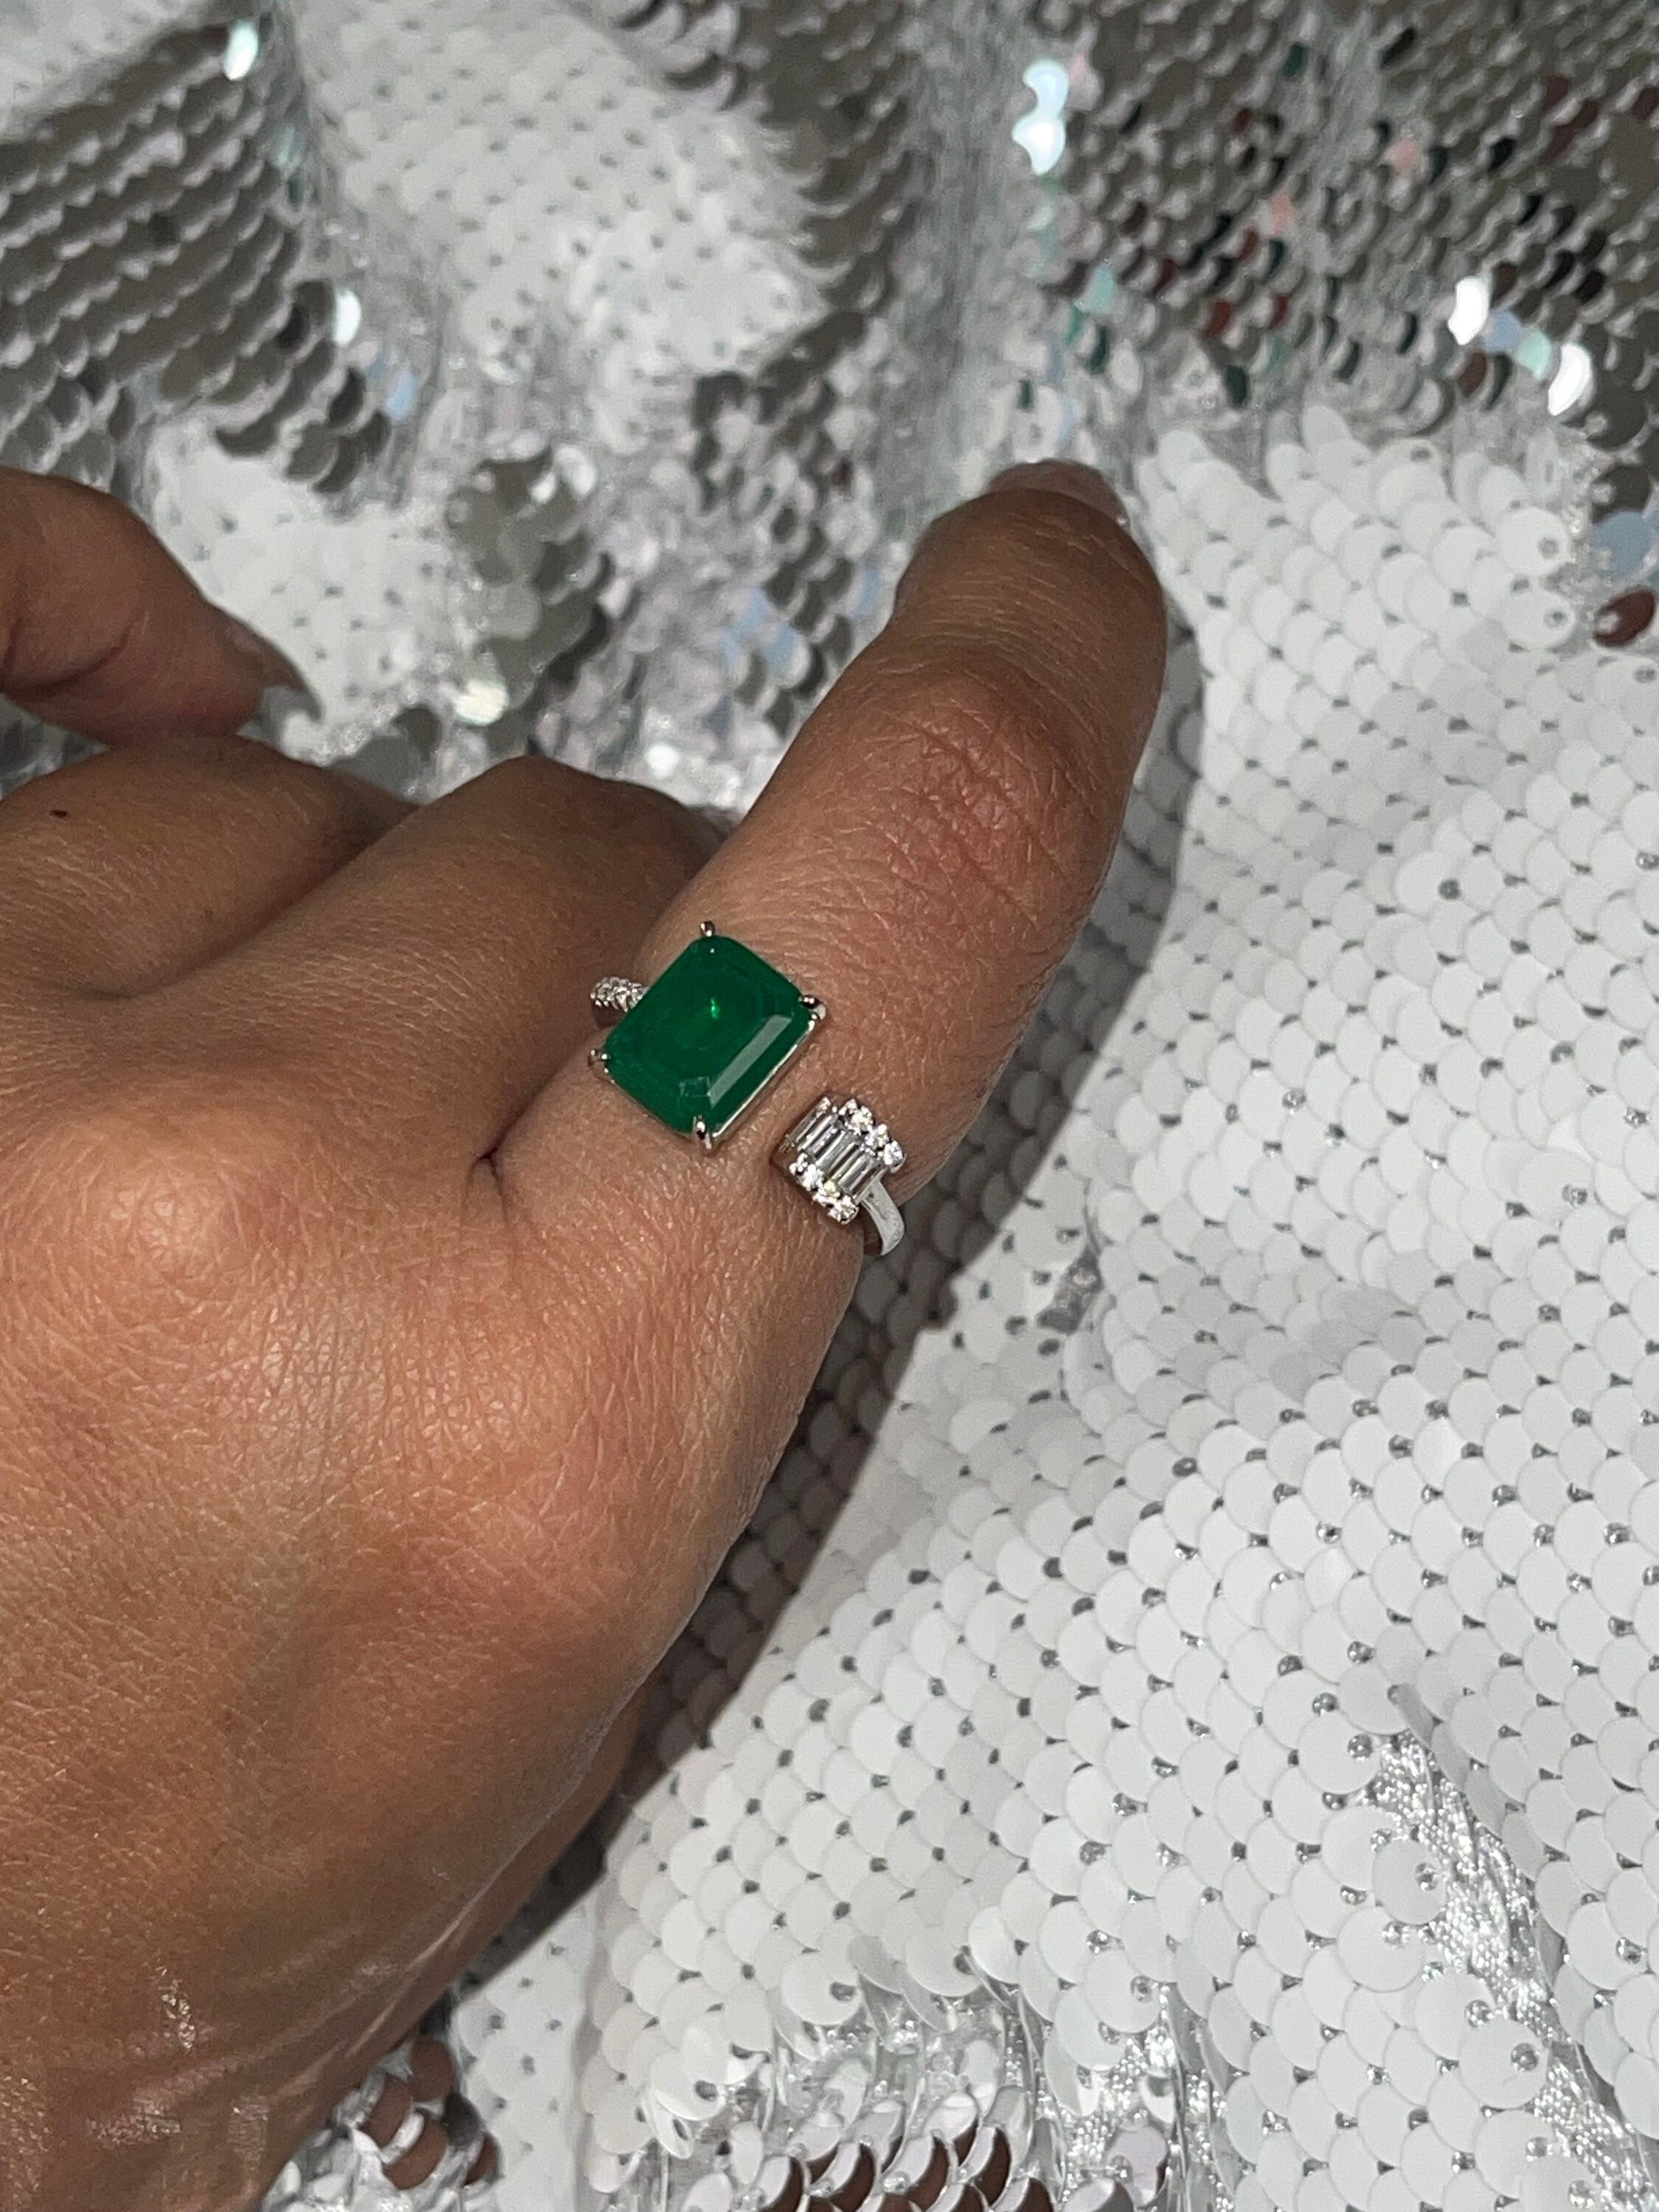 Uniquely designed Custom made emerald gemstone Crystal ring, Gifts for her, Anniversary gift, Christmas Gift, Best Affordable Gift for women